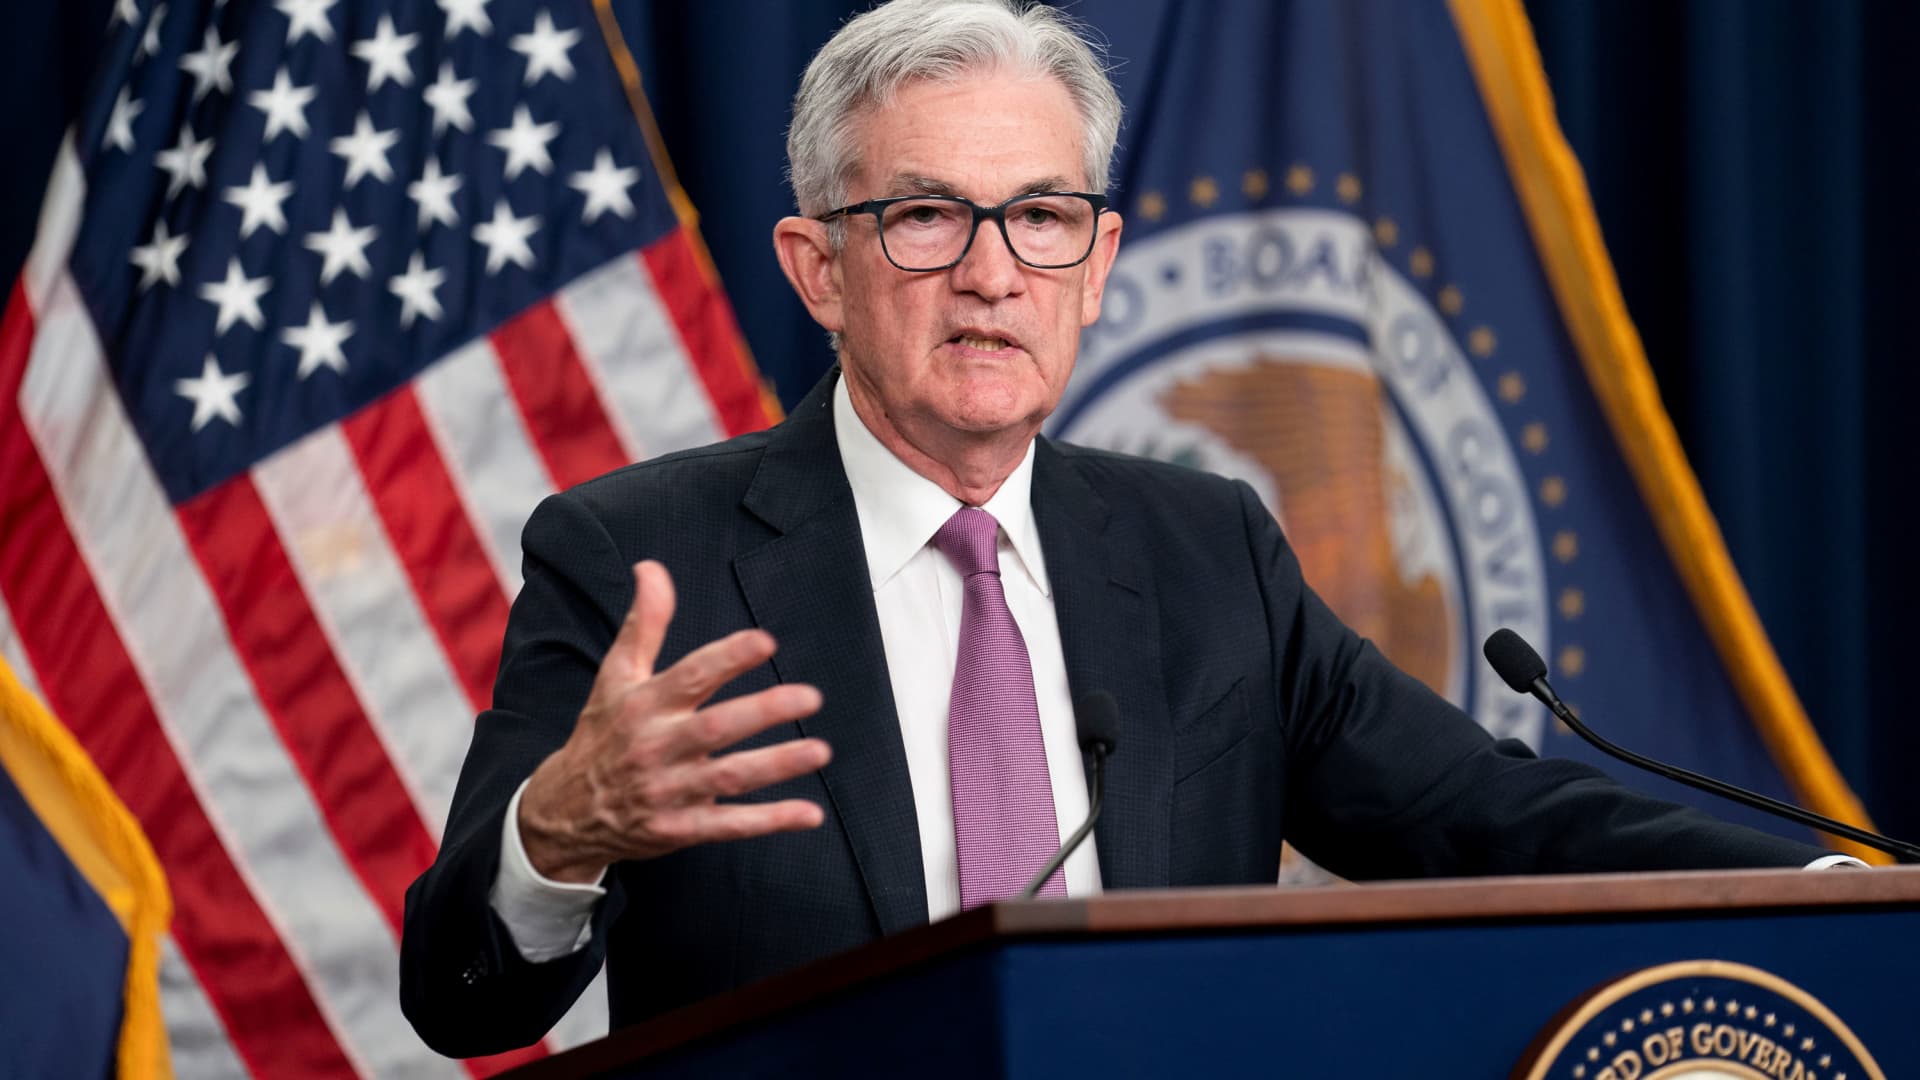 Fed raises rates by another three-quarters of a percentage point, pledges more hikes to fight inflation